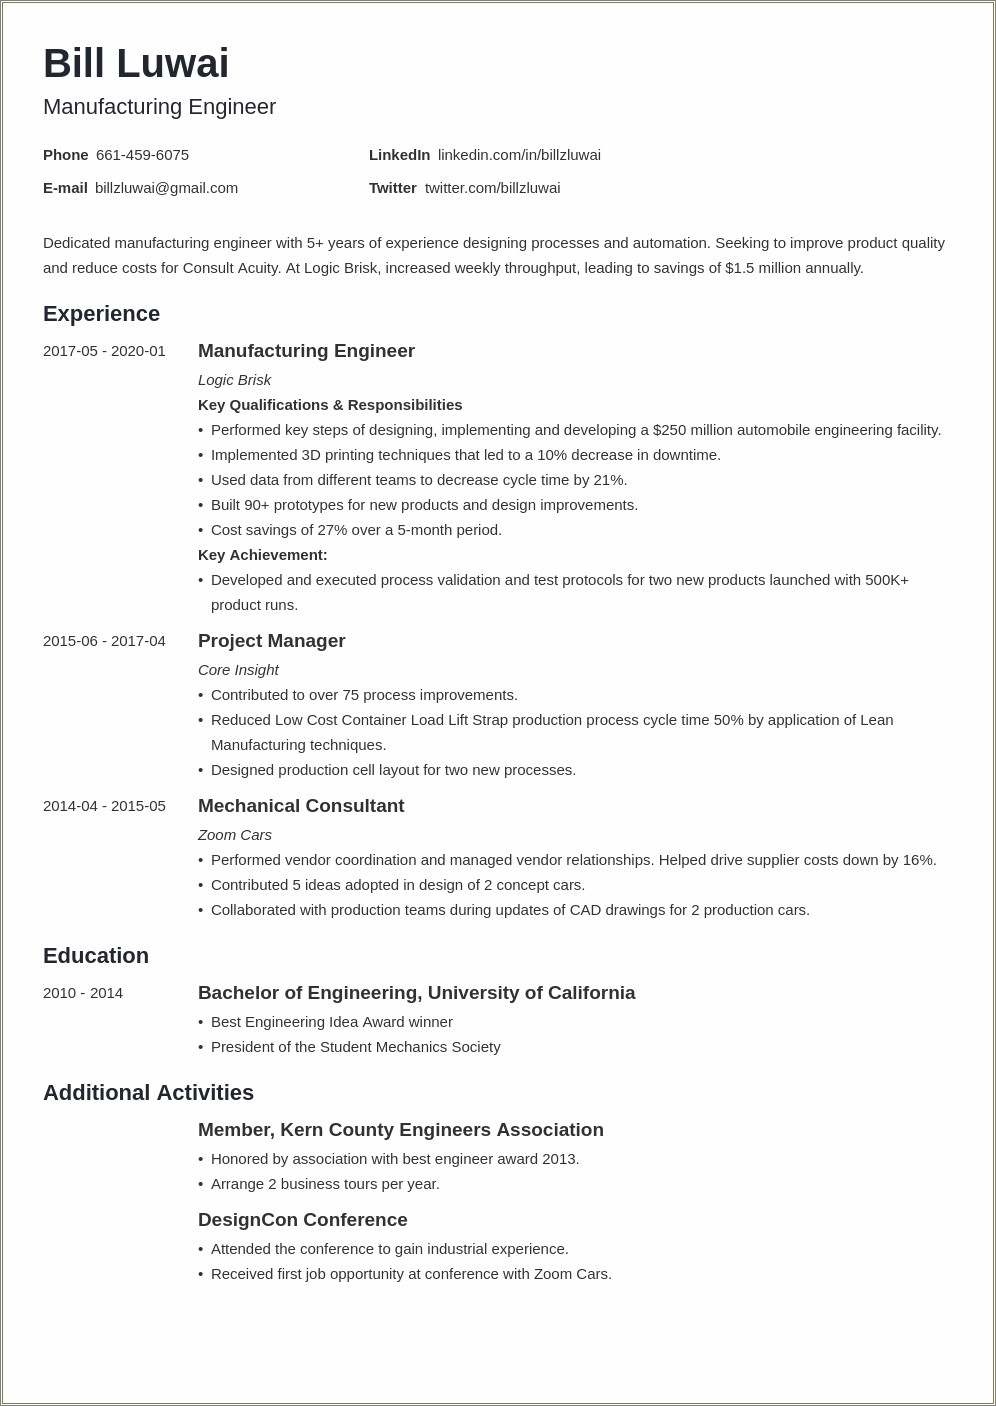 Professional Summary For Manufacturing Engineer Resume